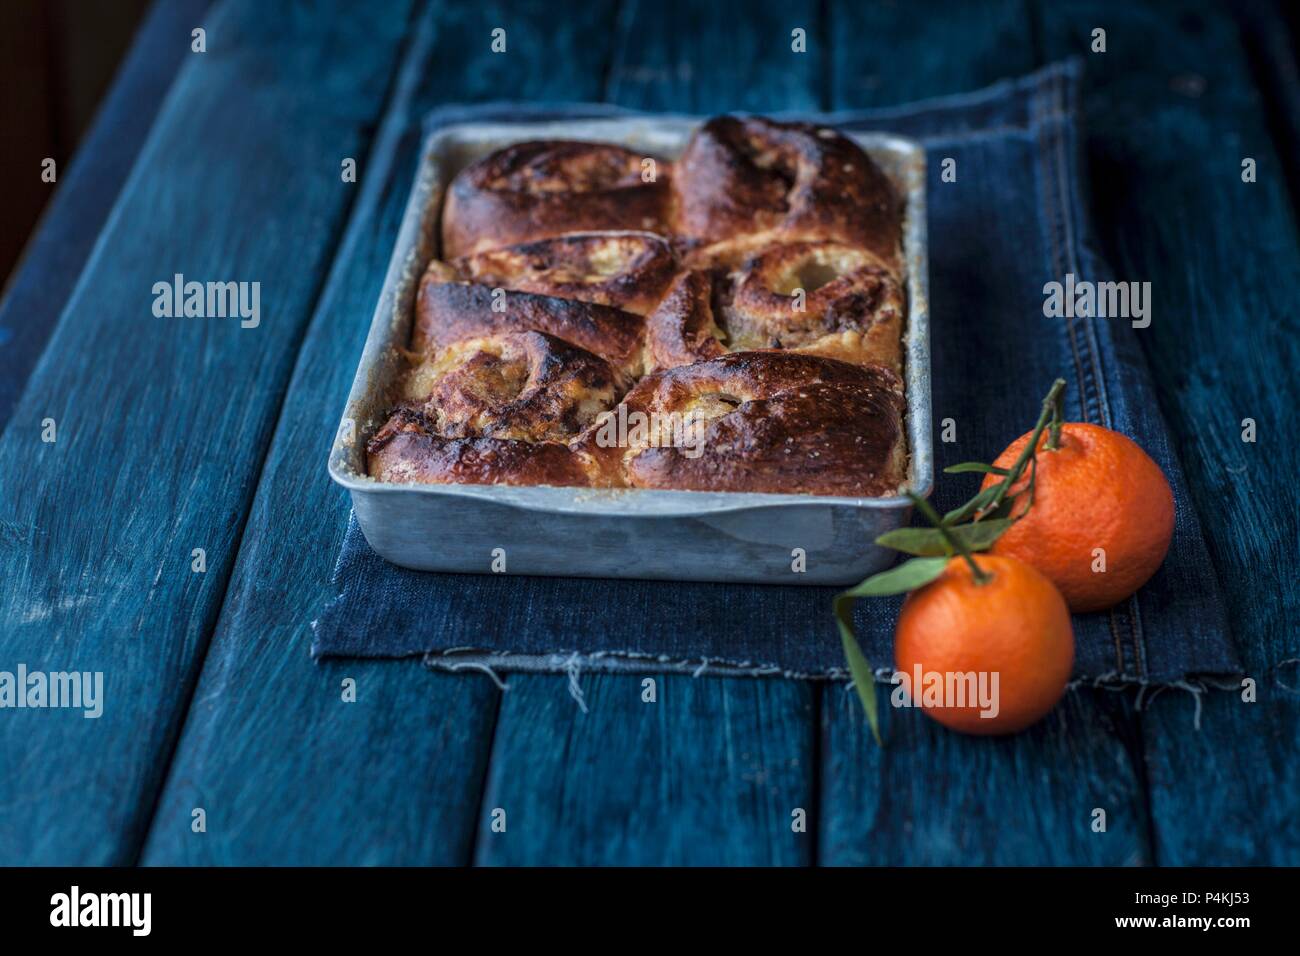 Apple and cinnamon buns in a baking dish next to mandarins Stock Photo